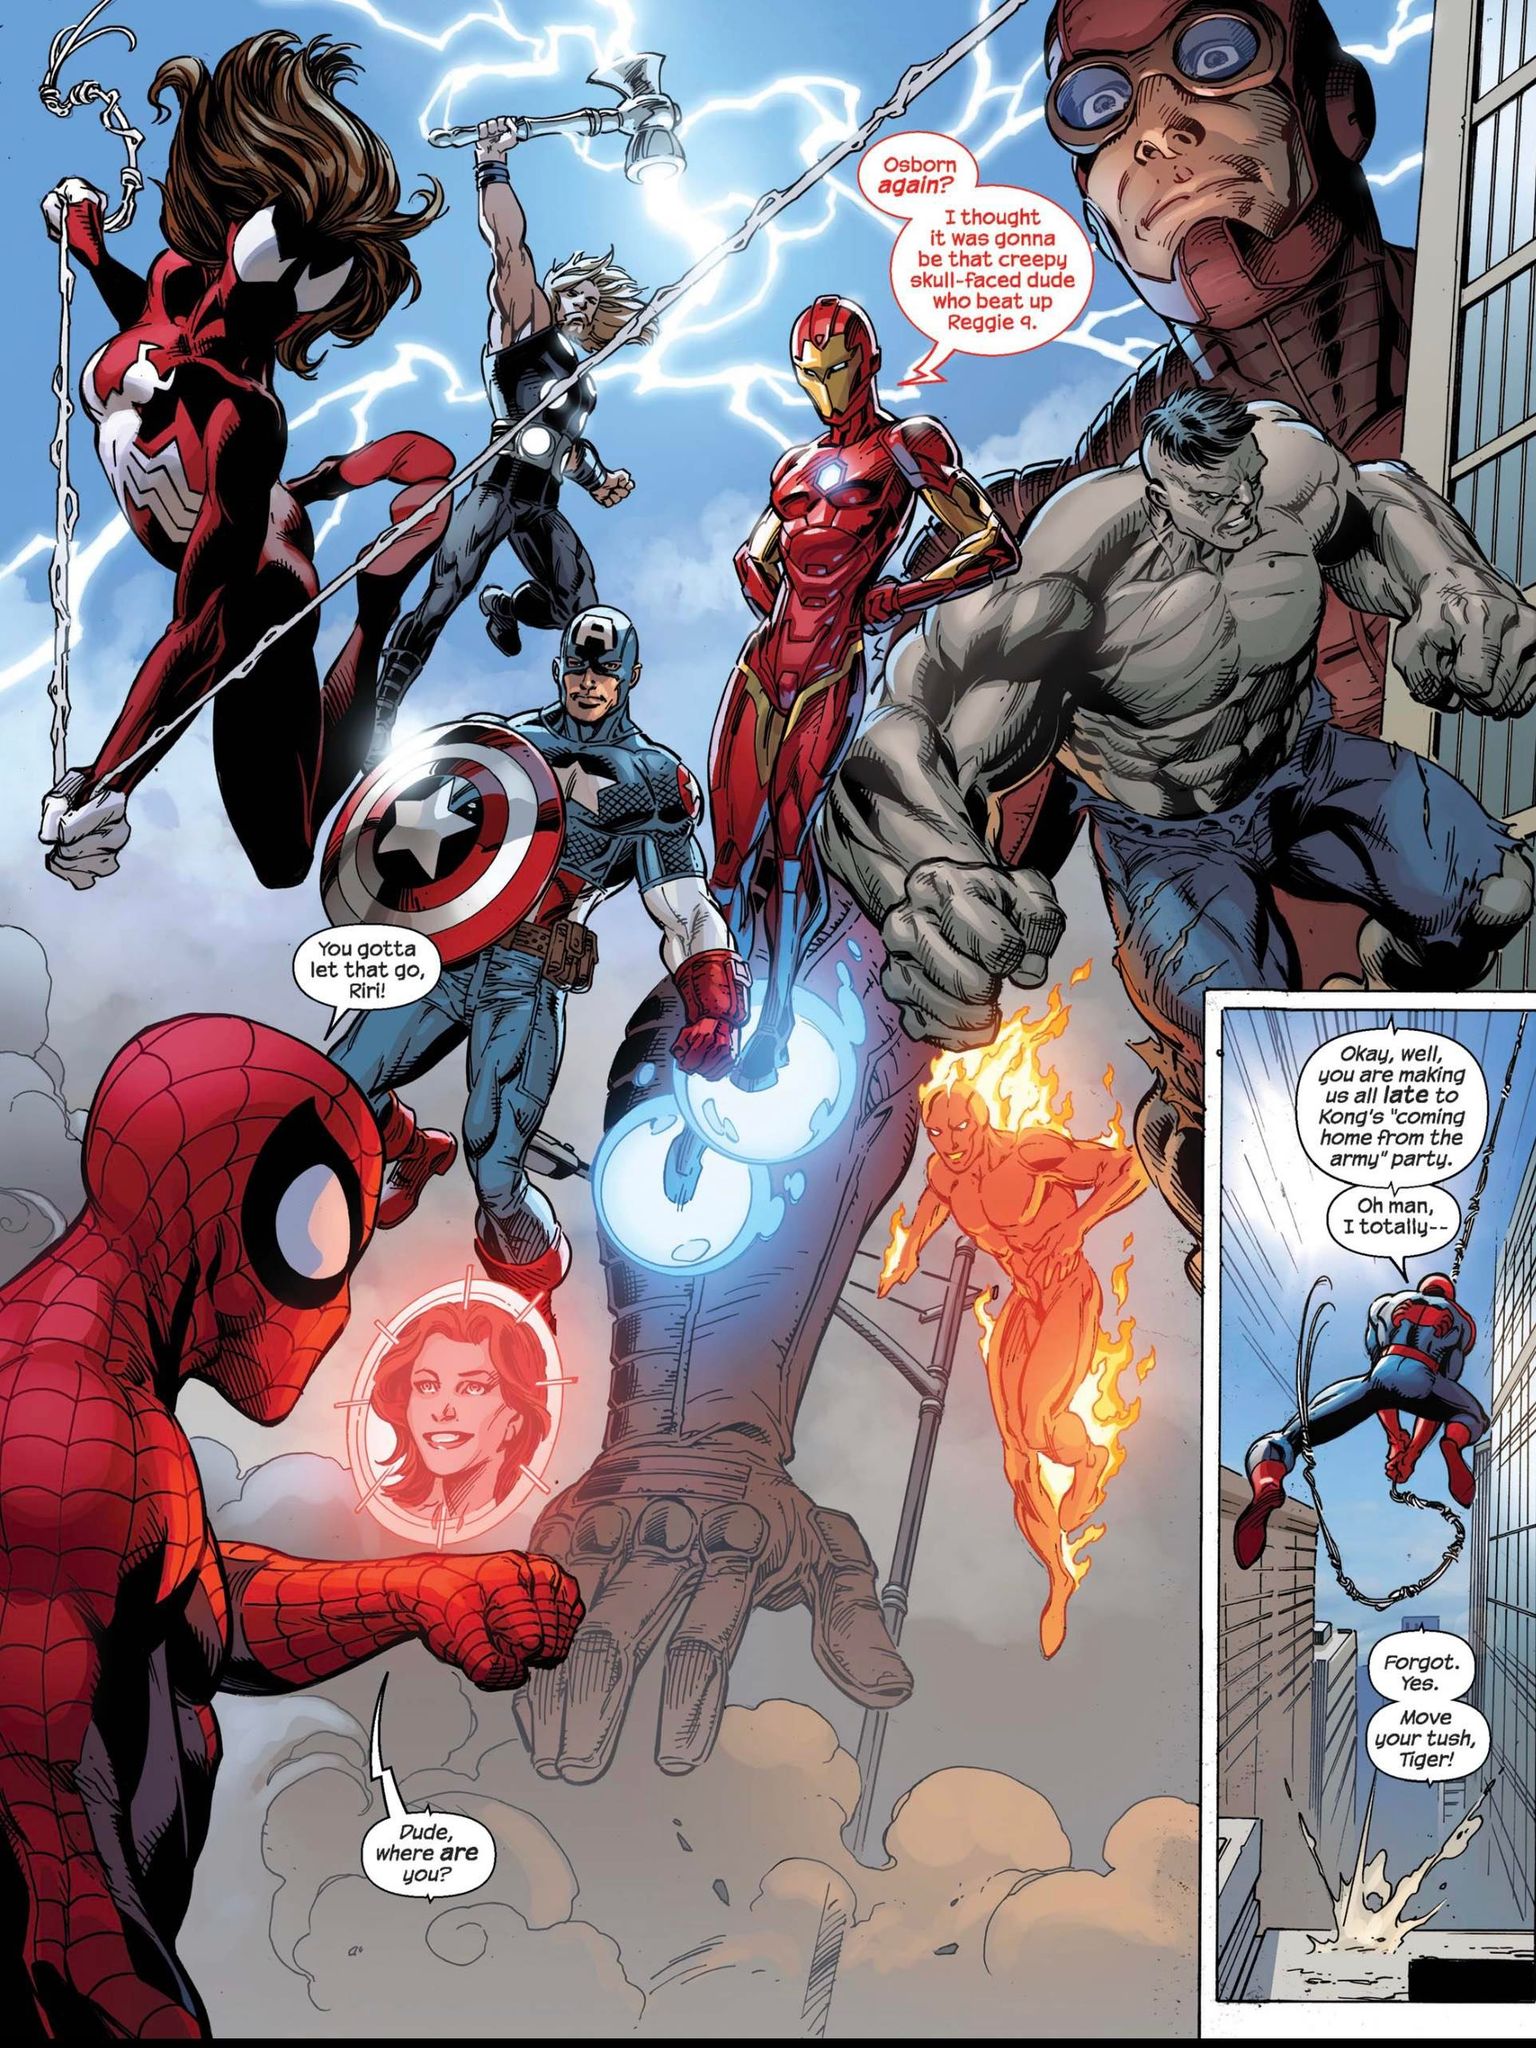 The Ultimate universe is revealed to have survived (Spider-Men II #5)